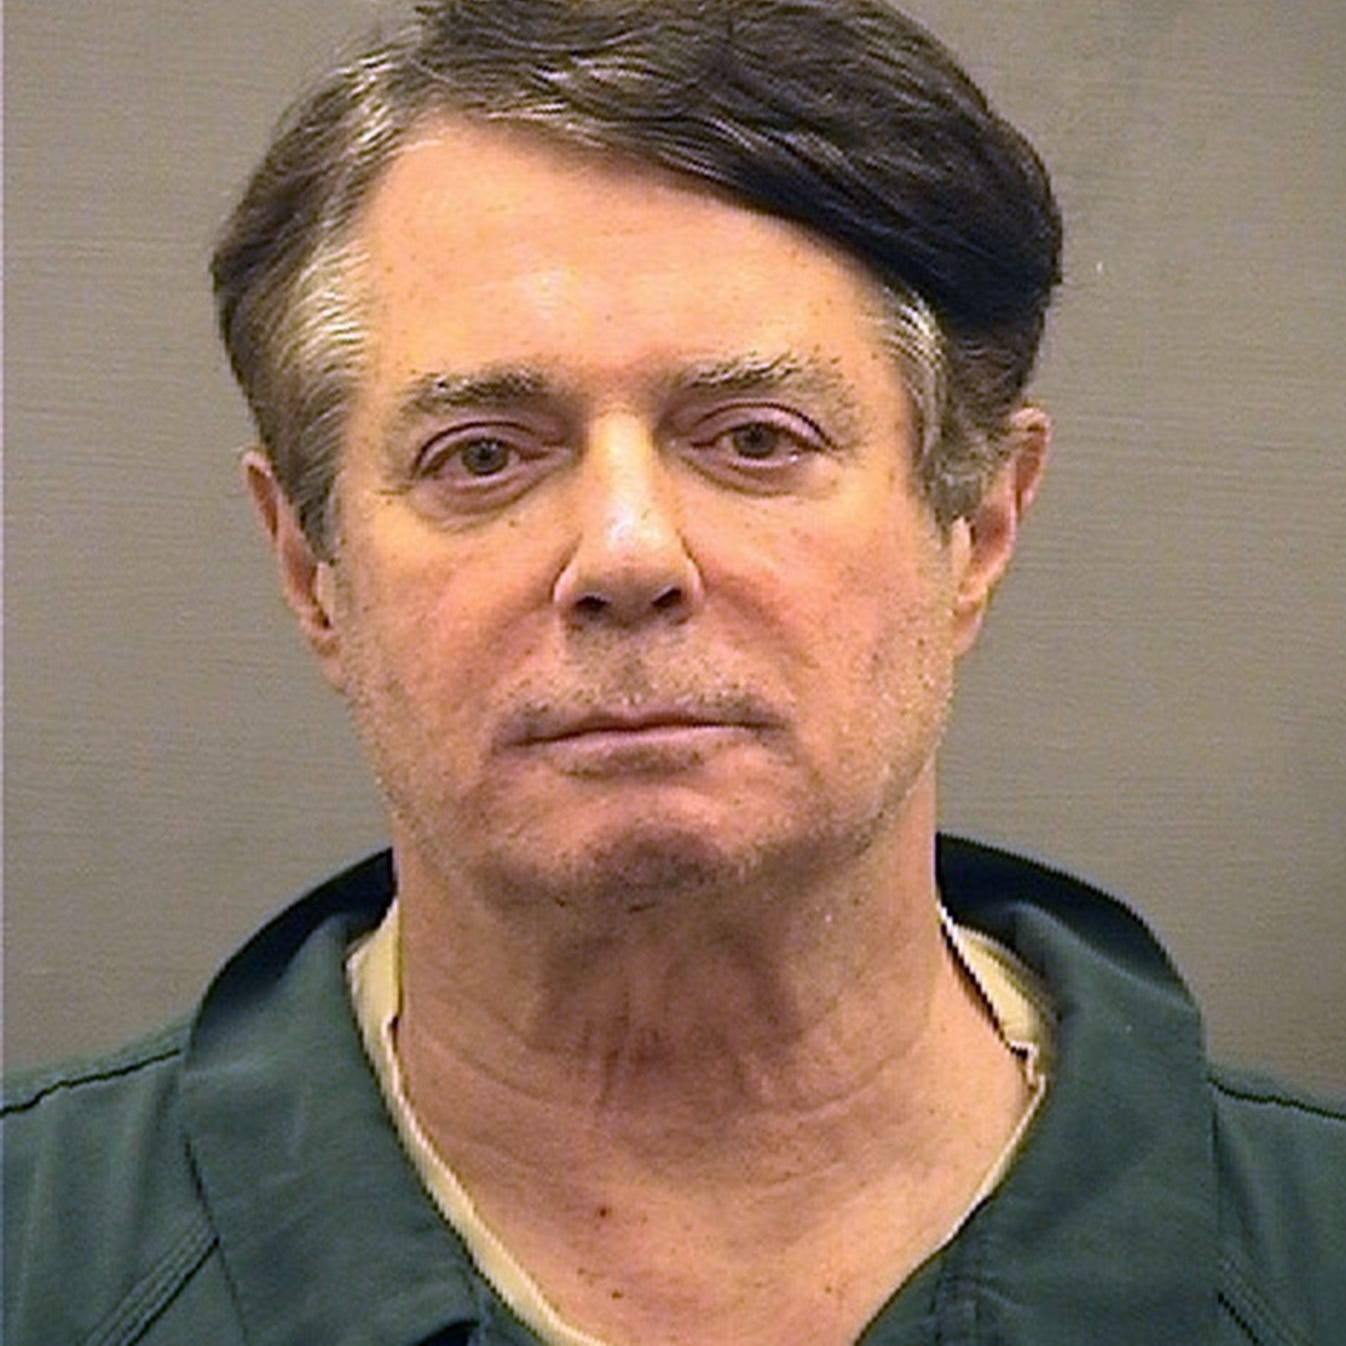 Paul Manafort poses for a mugshot photo at the Alexandria Detention Center in Alexandria, Virgina.